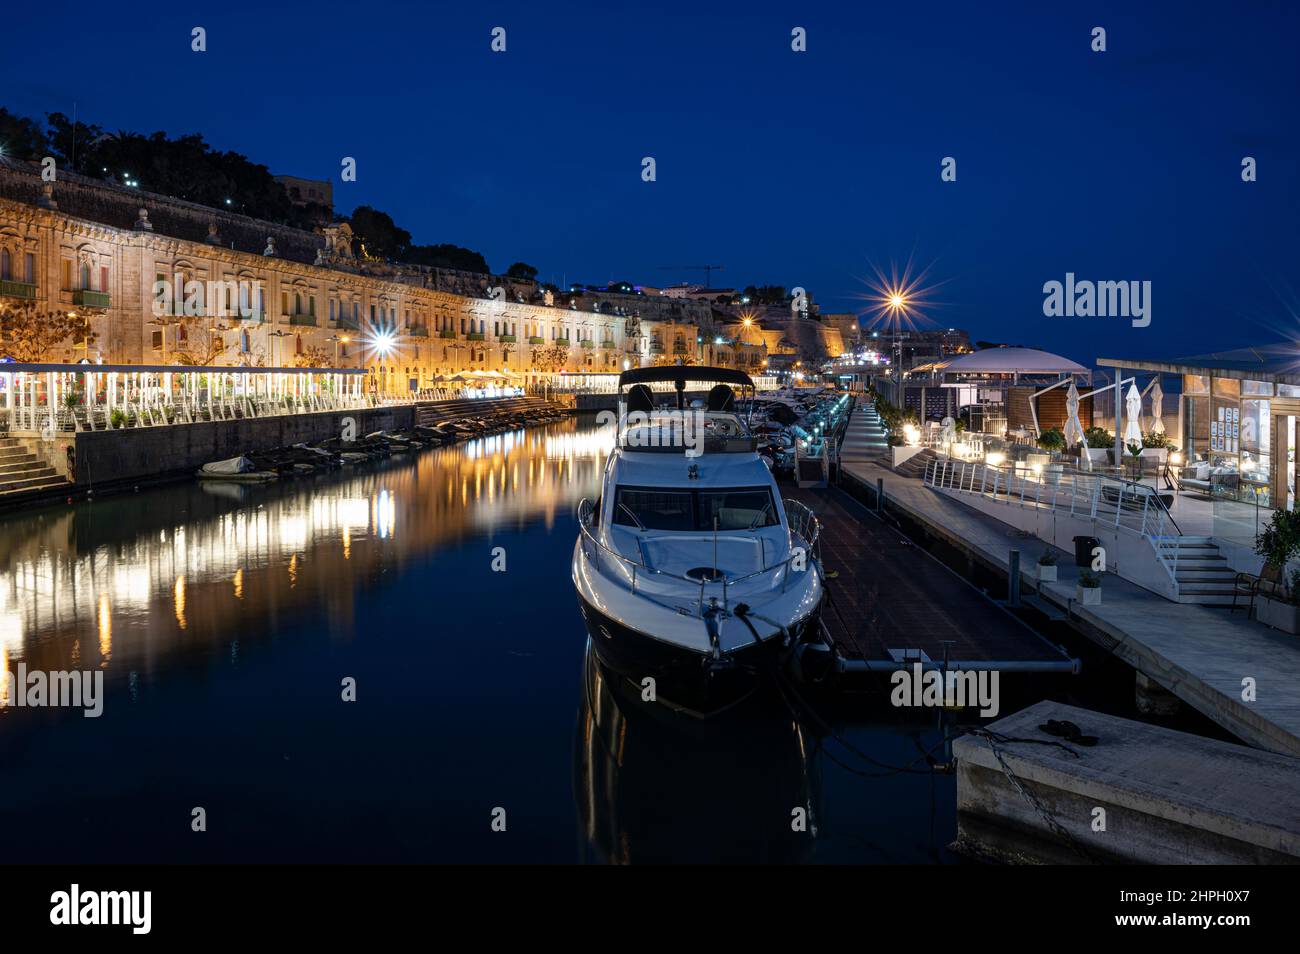 Valletta waterfront district with small harbor with boats and cafes and restaurants illuminated at night. Stock Photo